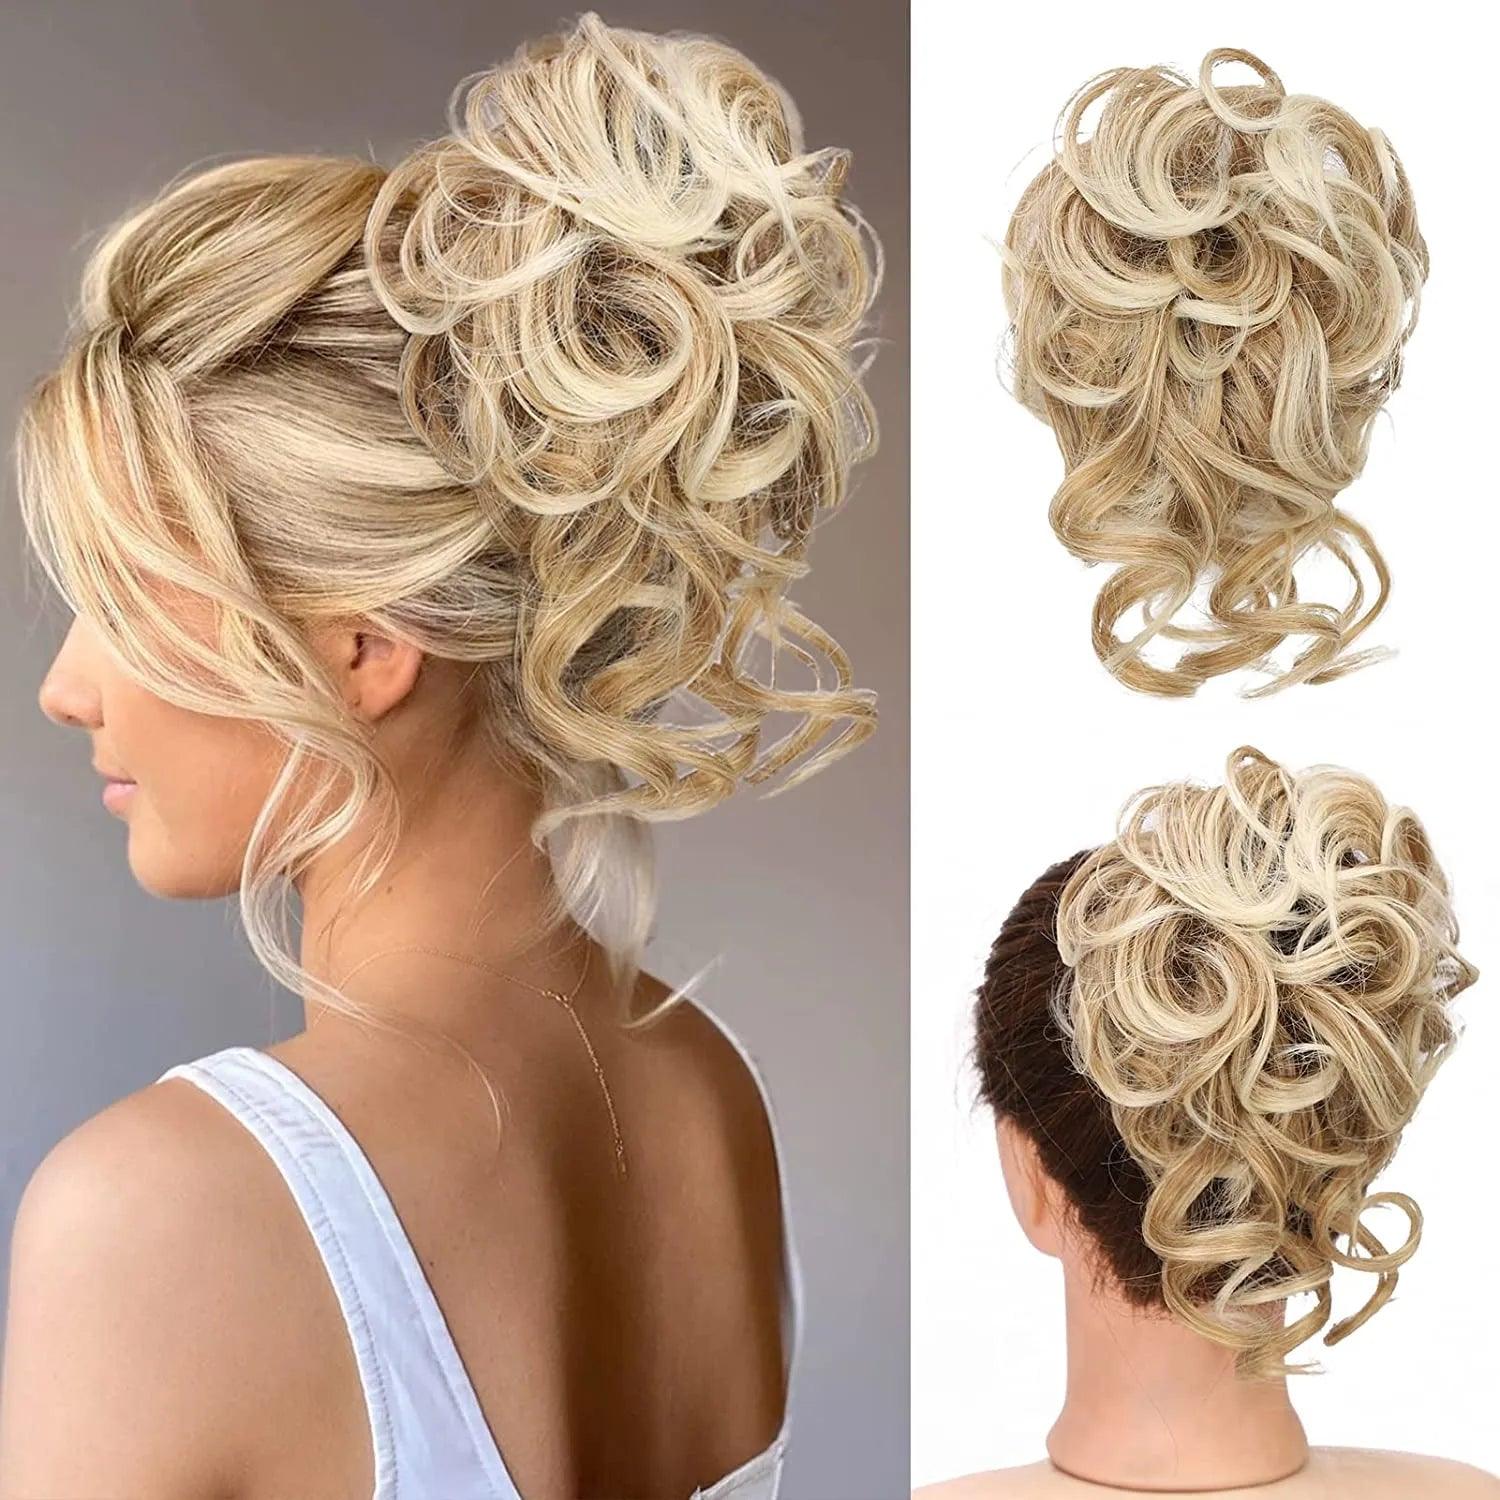 Messy Curly Synthetic Hair Chignon Bun with Elastic Band - Black/Brown Wig for Women  ourlum.com   